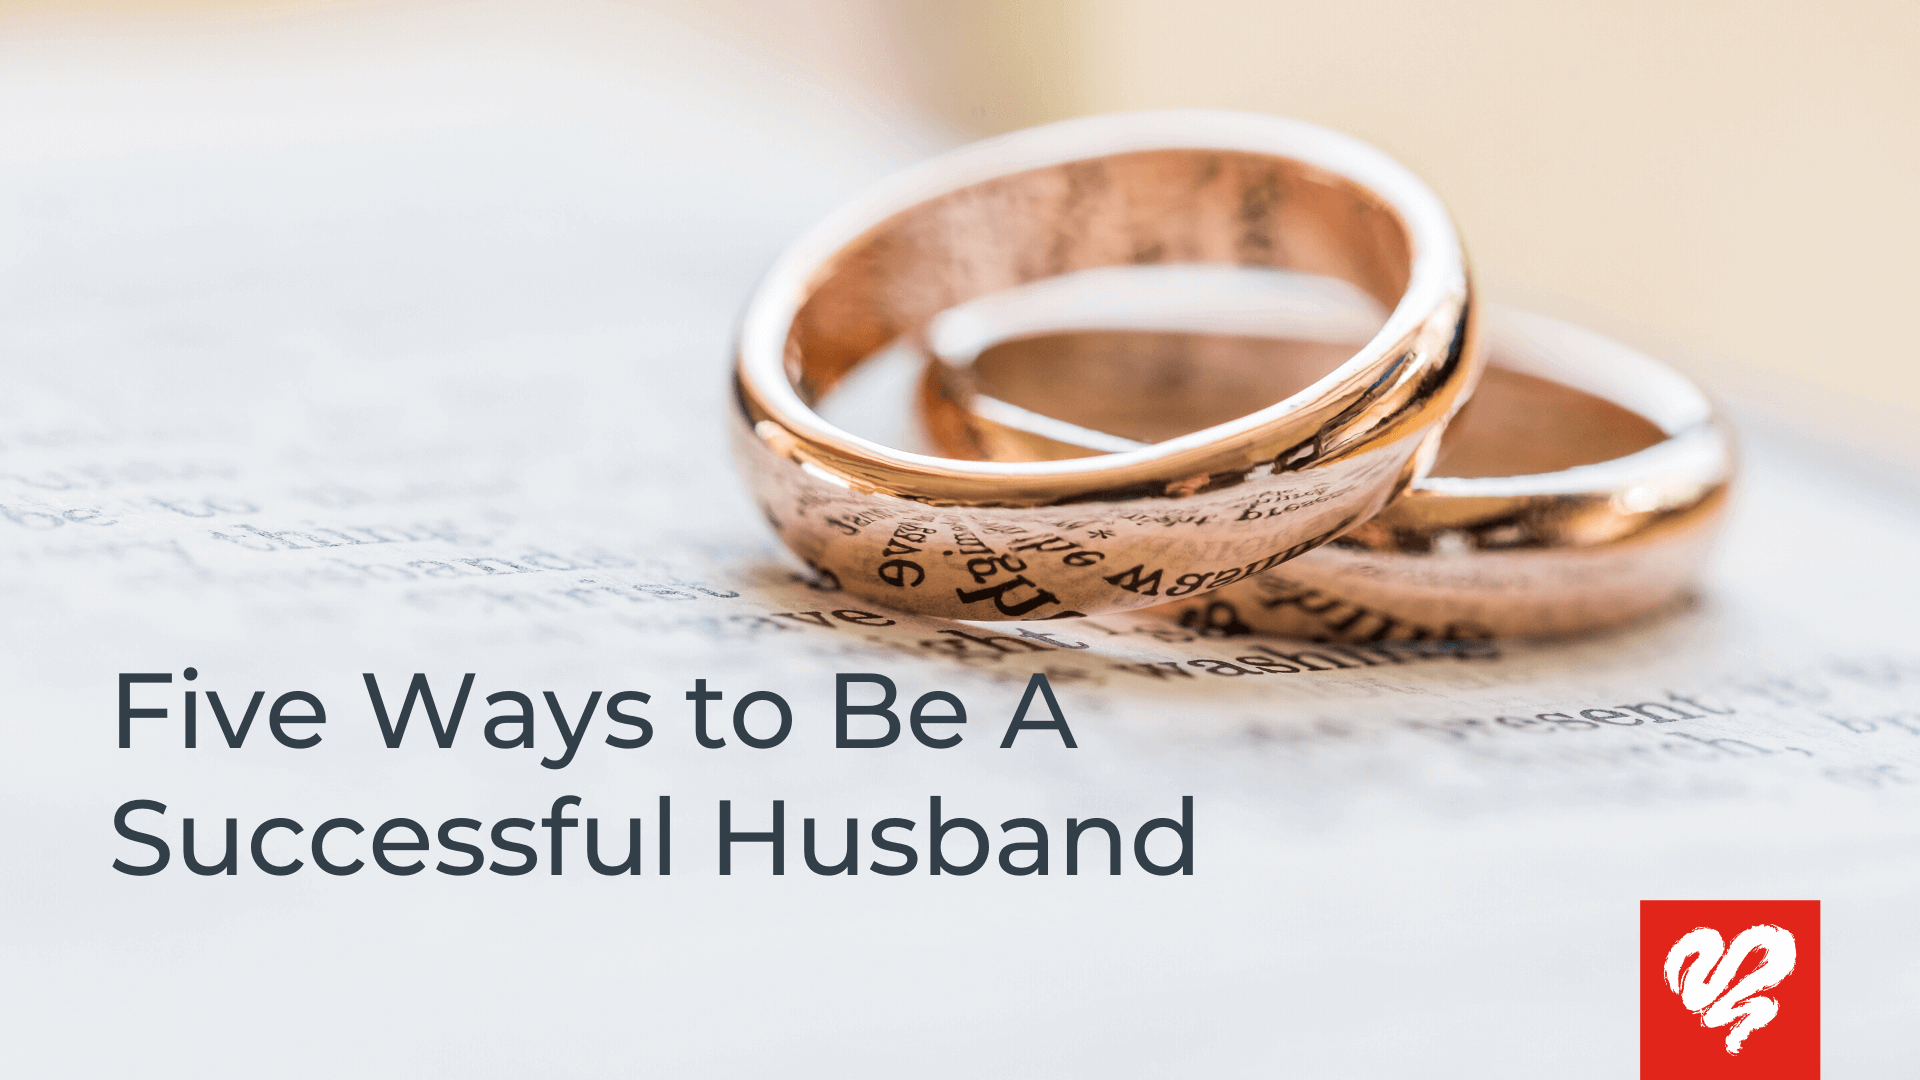 Five Ways to Be a Successful Husband